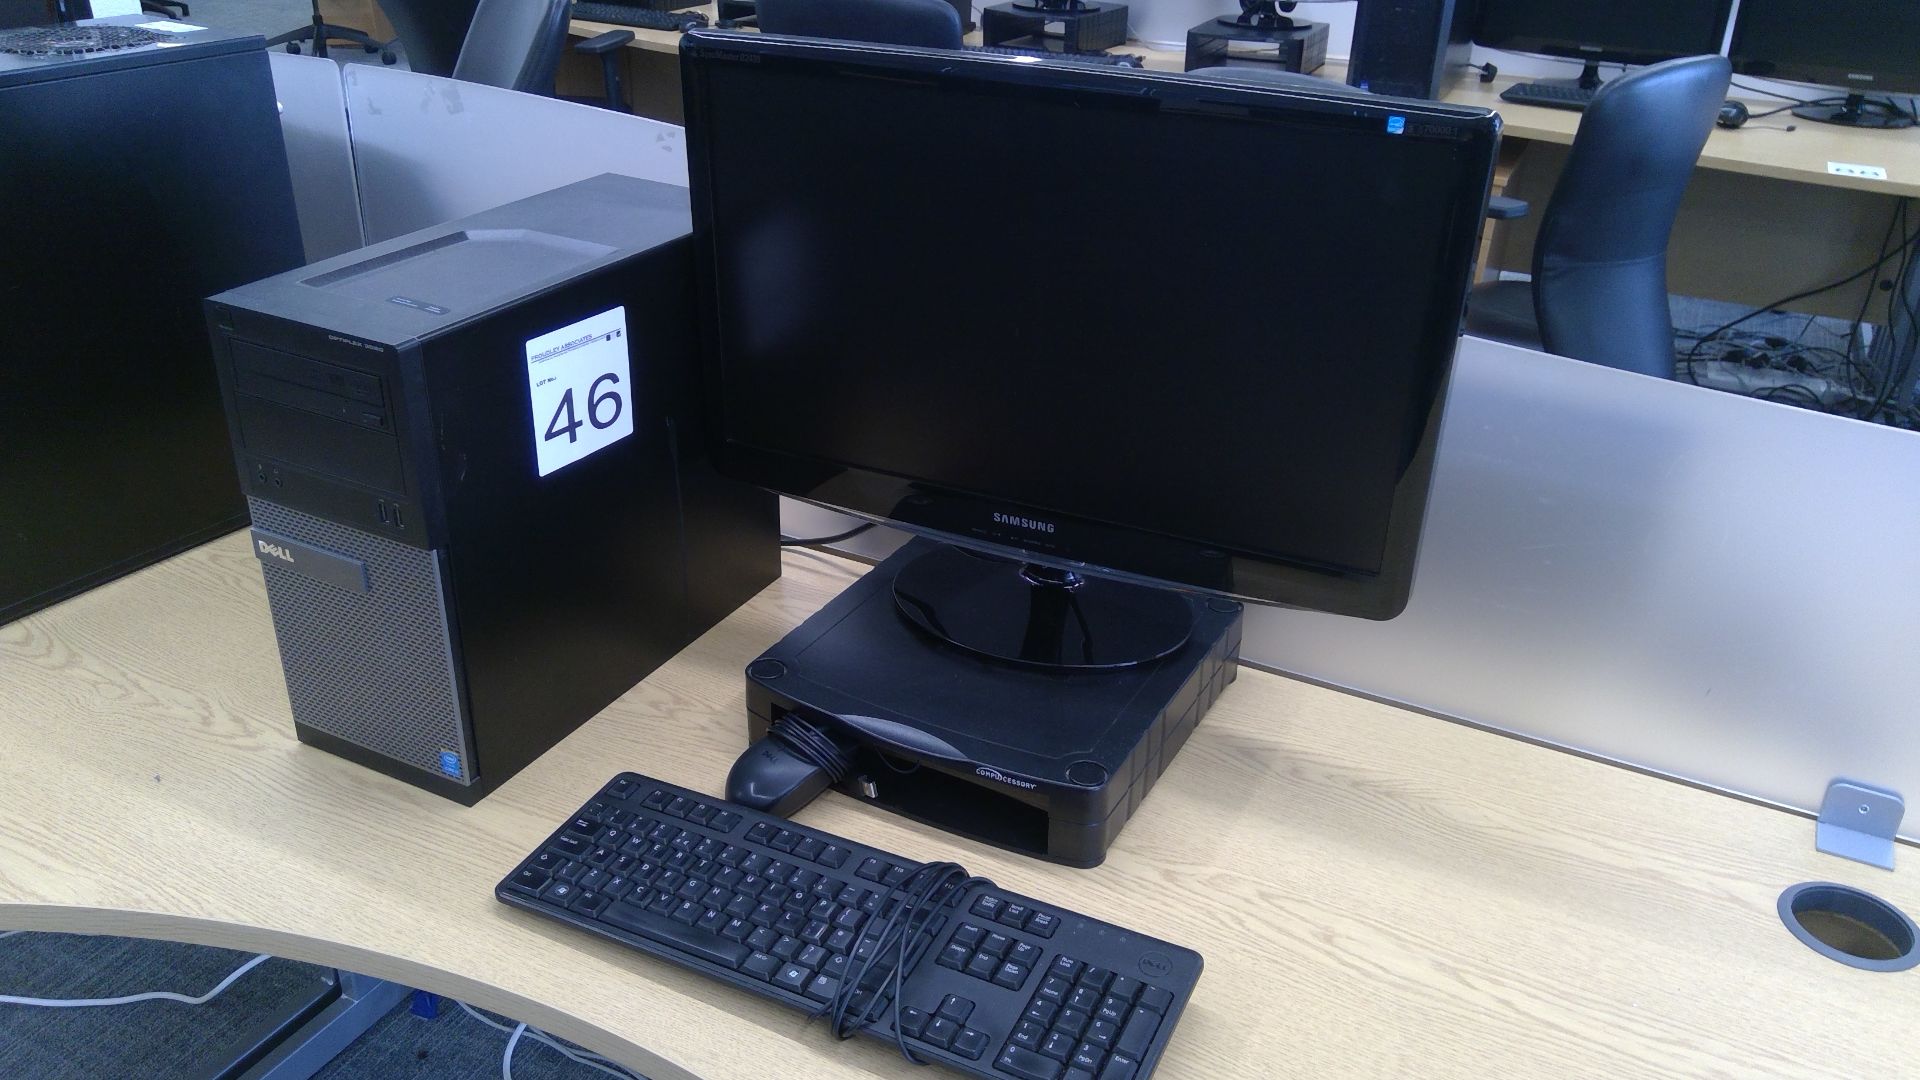 Dell Optiplex 3020 Core i3 PC with Samsung 24 inch monitor, keyboard and mouse